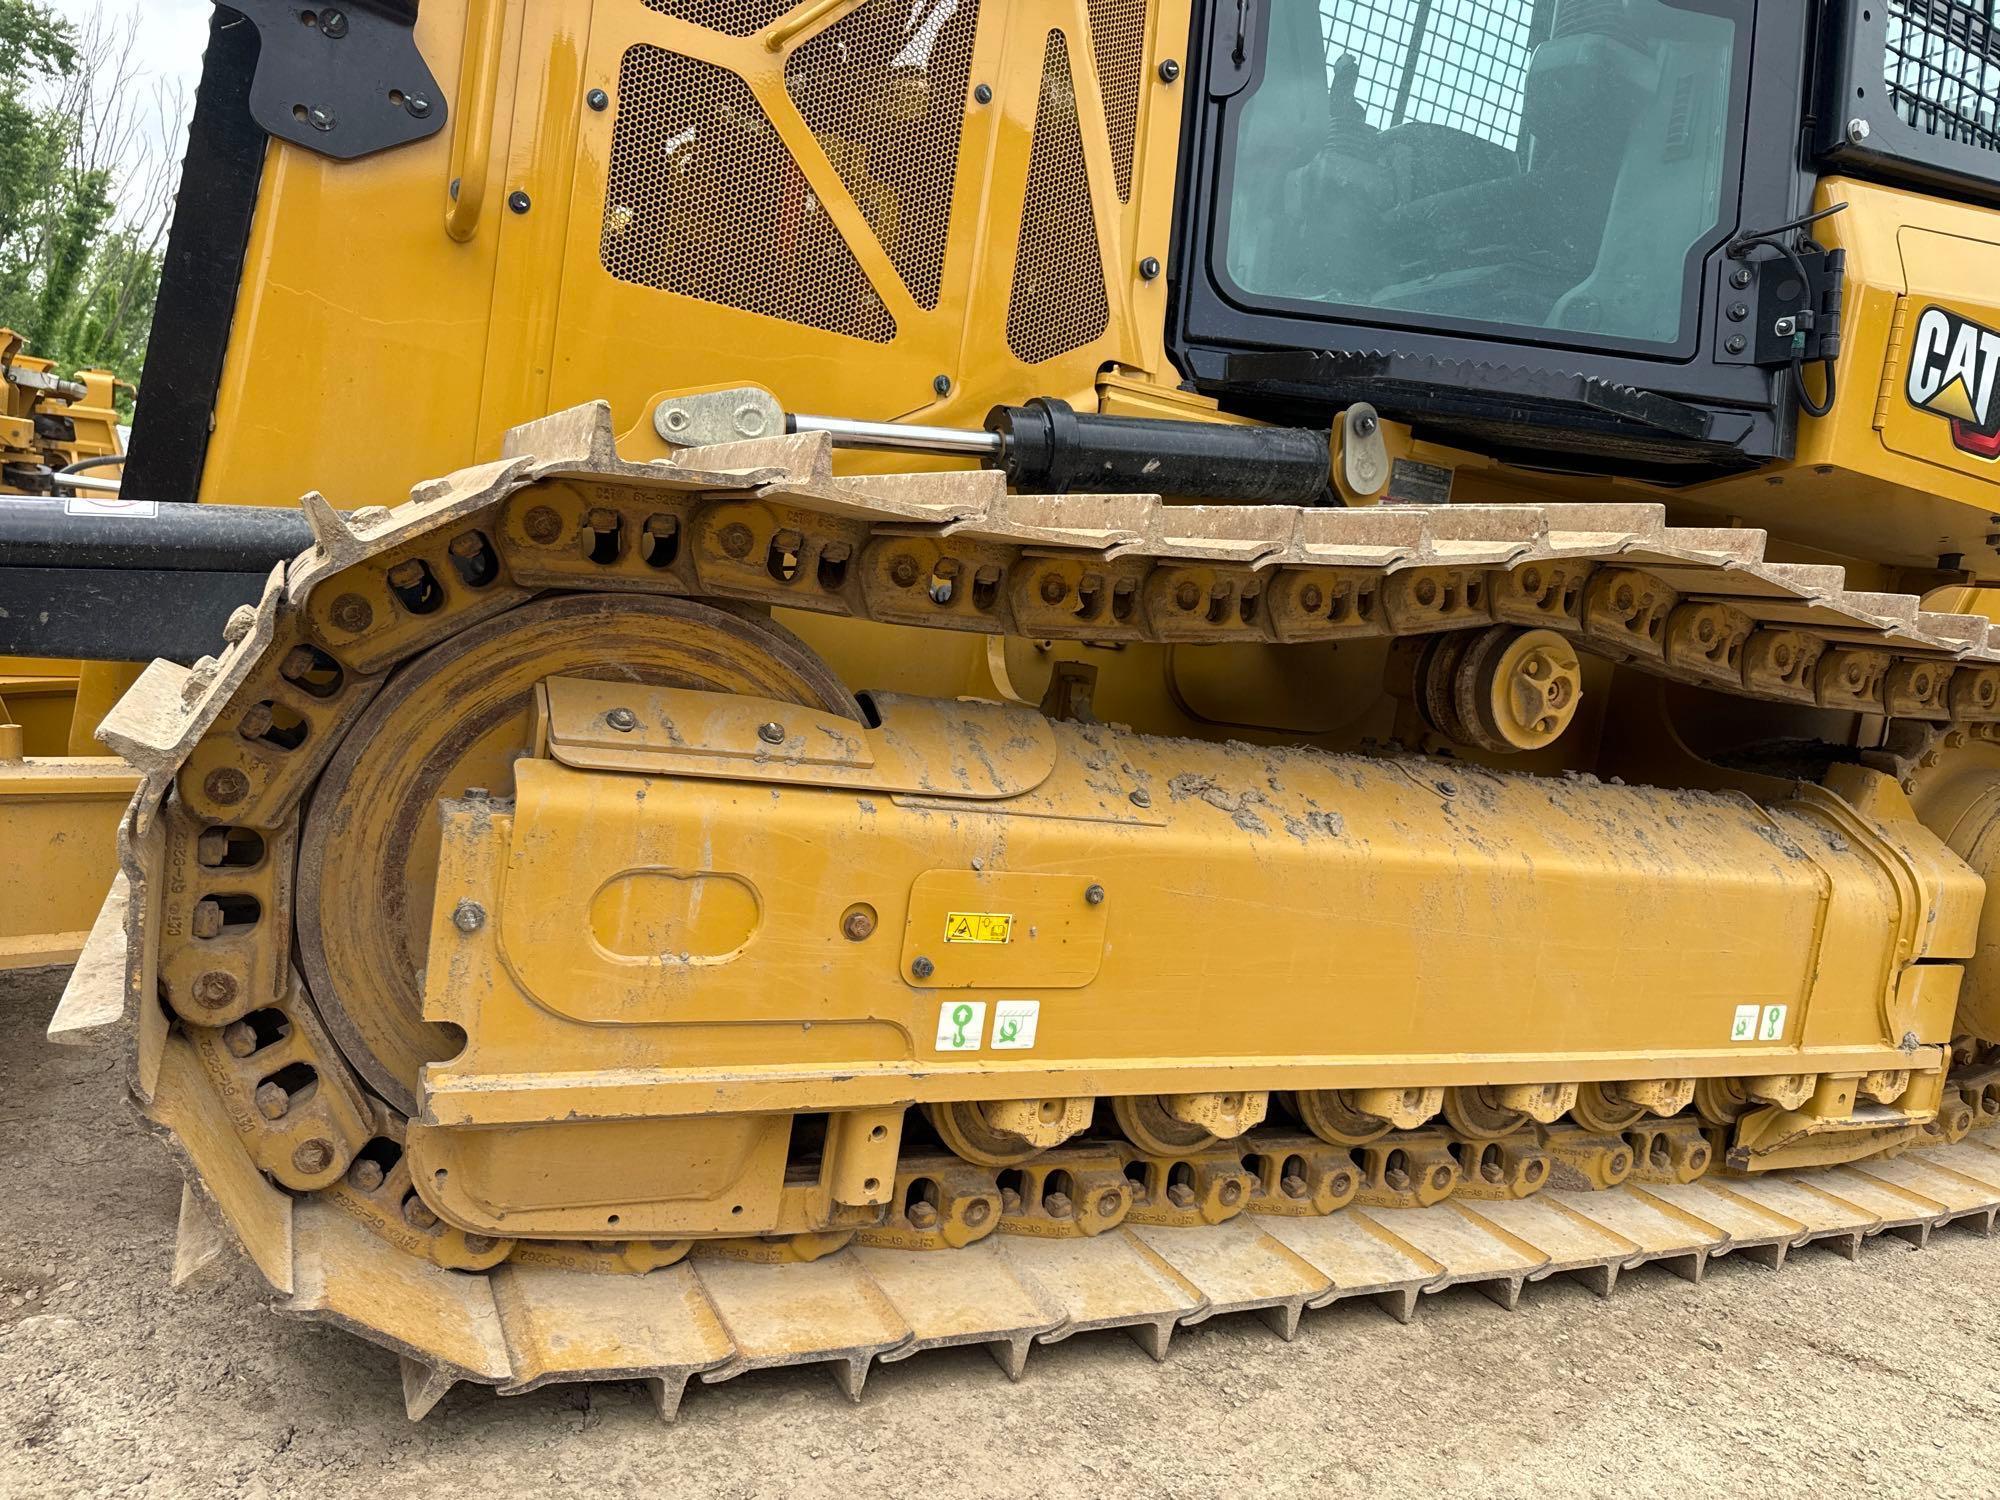 LIKE NEW CAT D3 CRAWLER TRACTOR SN-02126. powered by Cat diesel engine, equipped with EROPS, air,